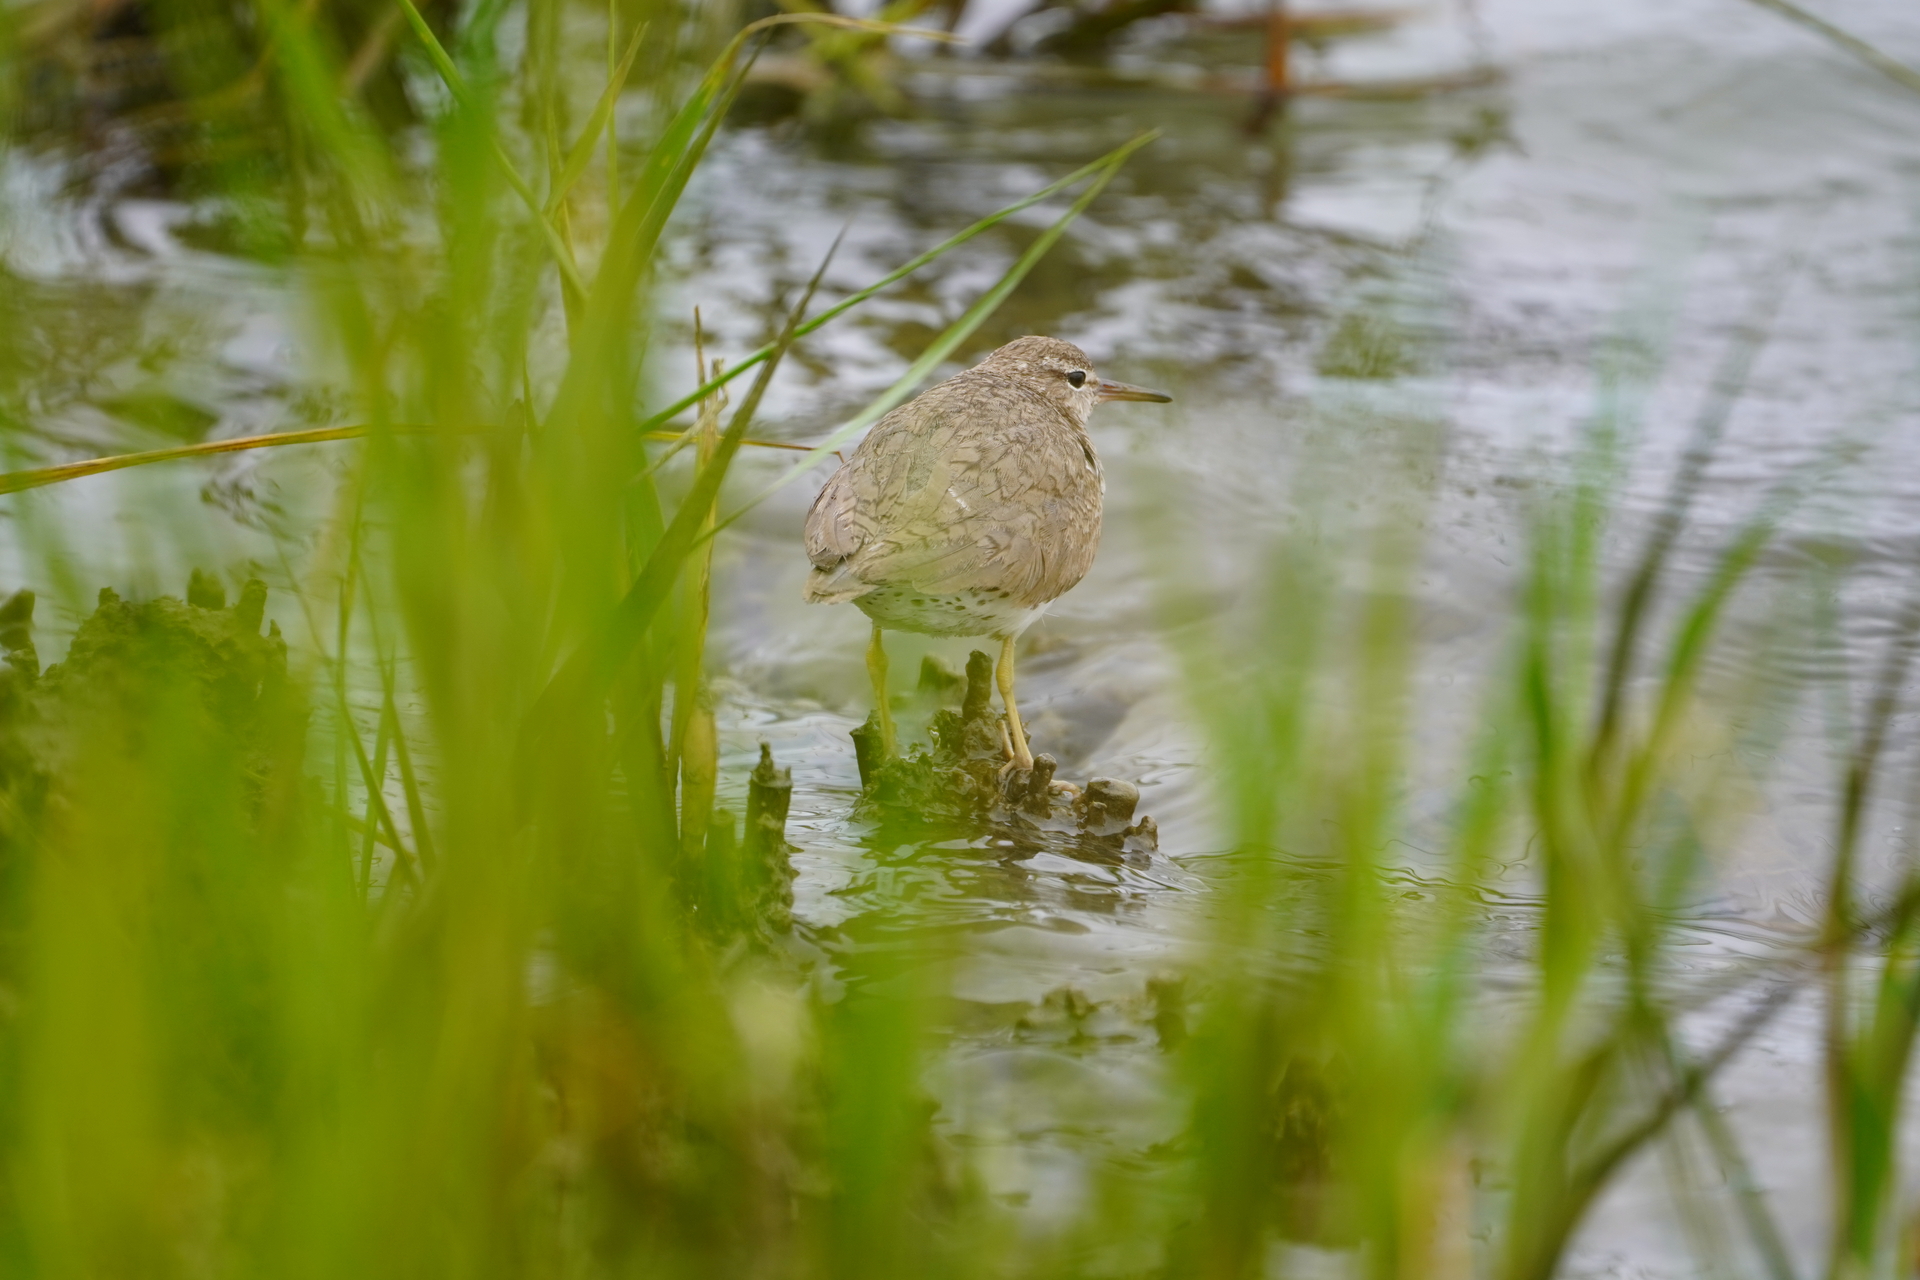 Spotted sandpiper beyond out of focus grass